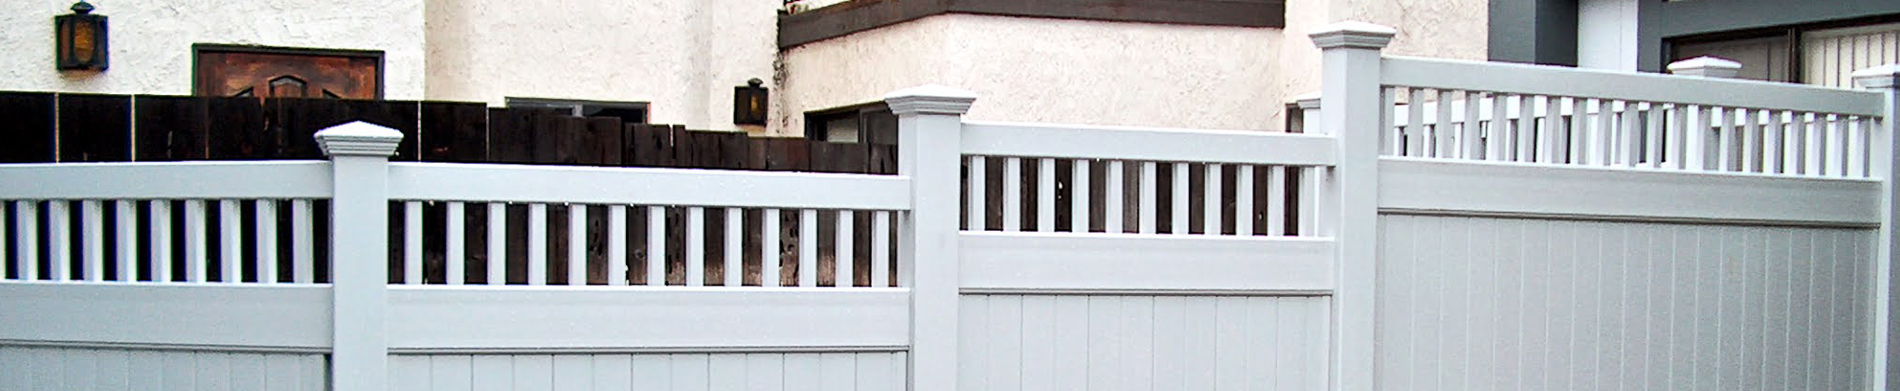 If you are on the lookout for the best vinyl fence – choose Duramax Vinyl Fences